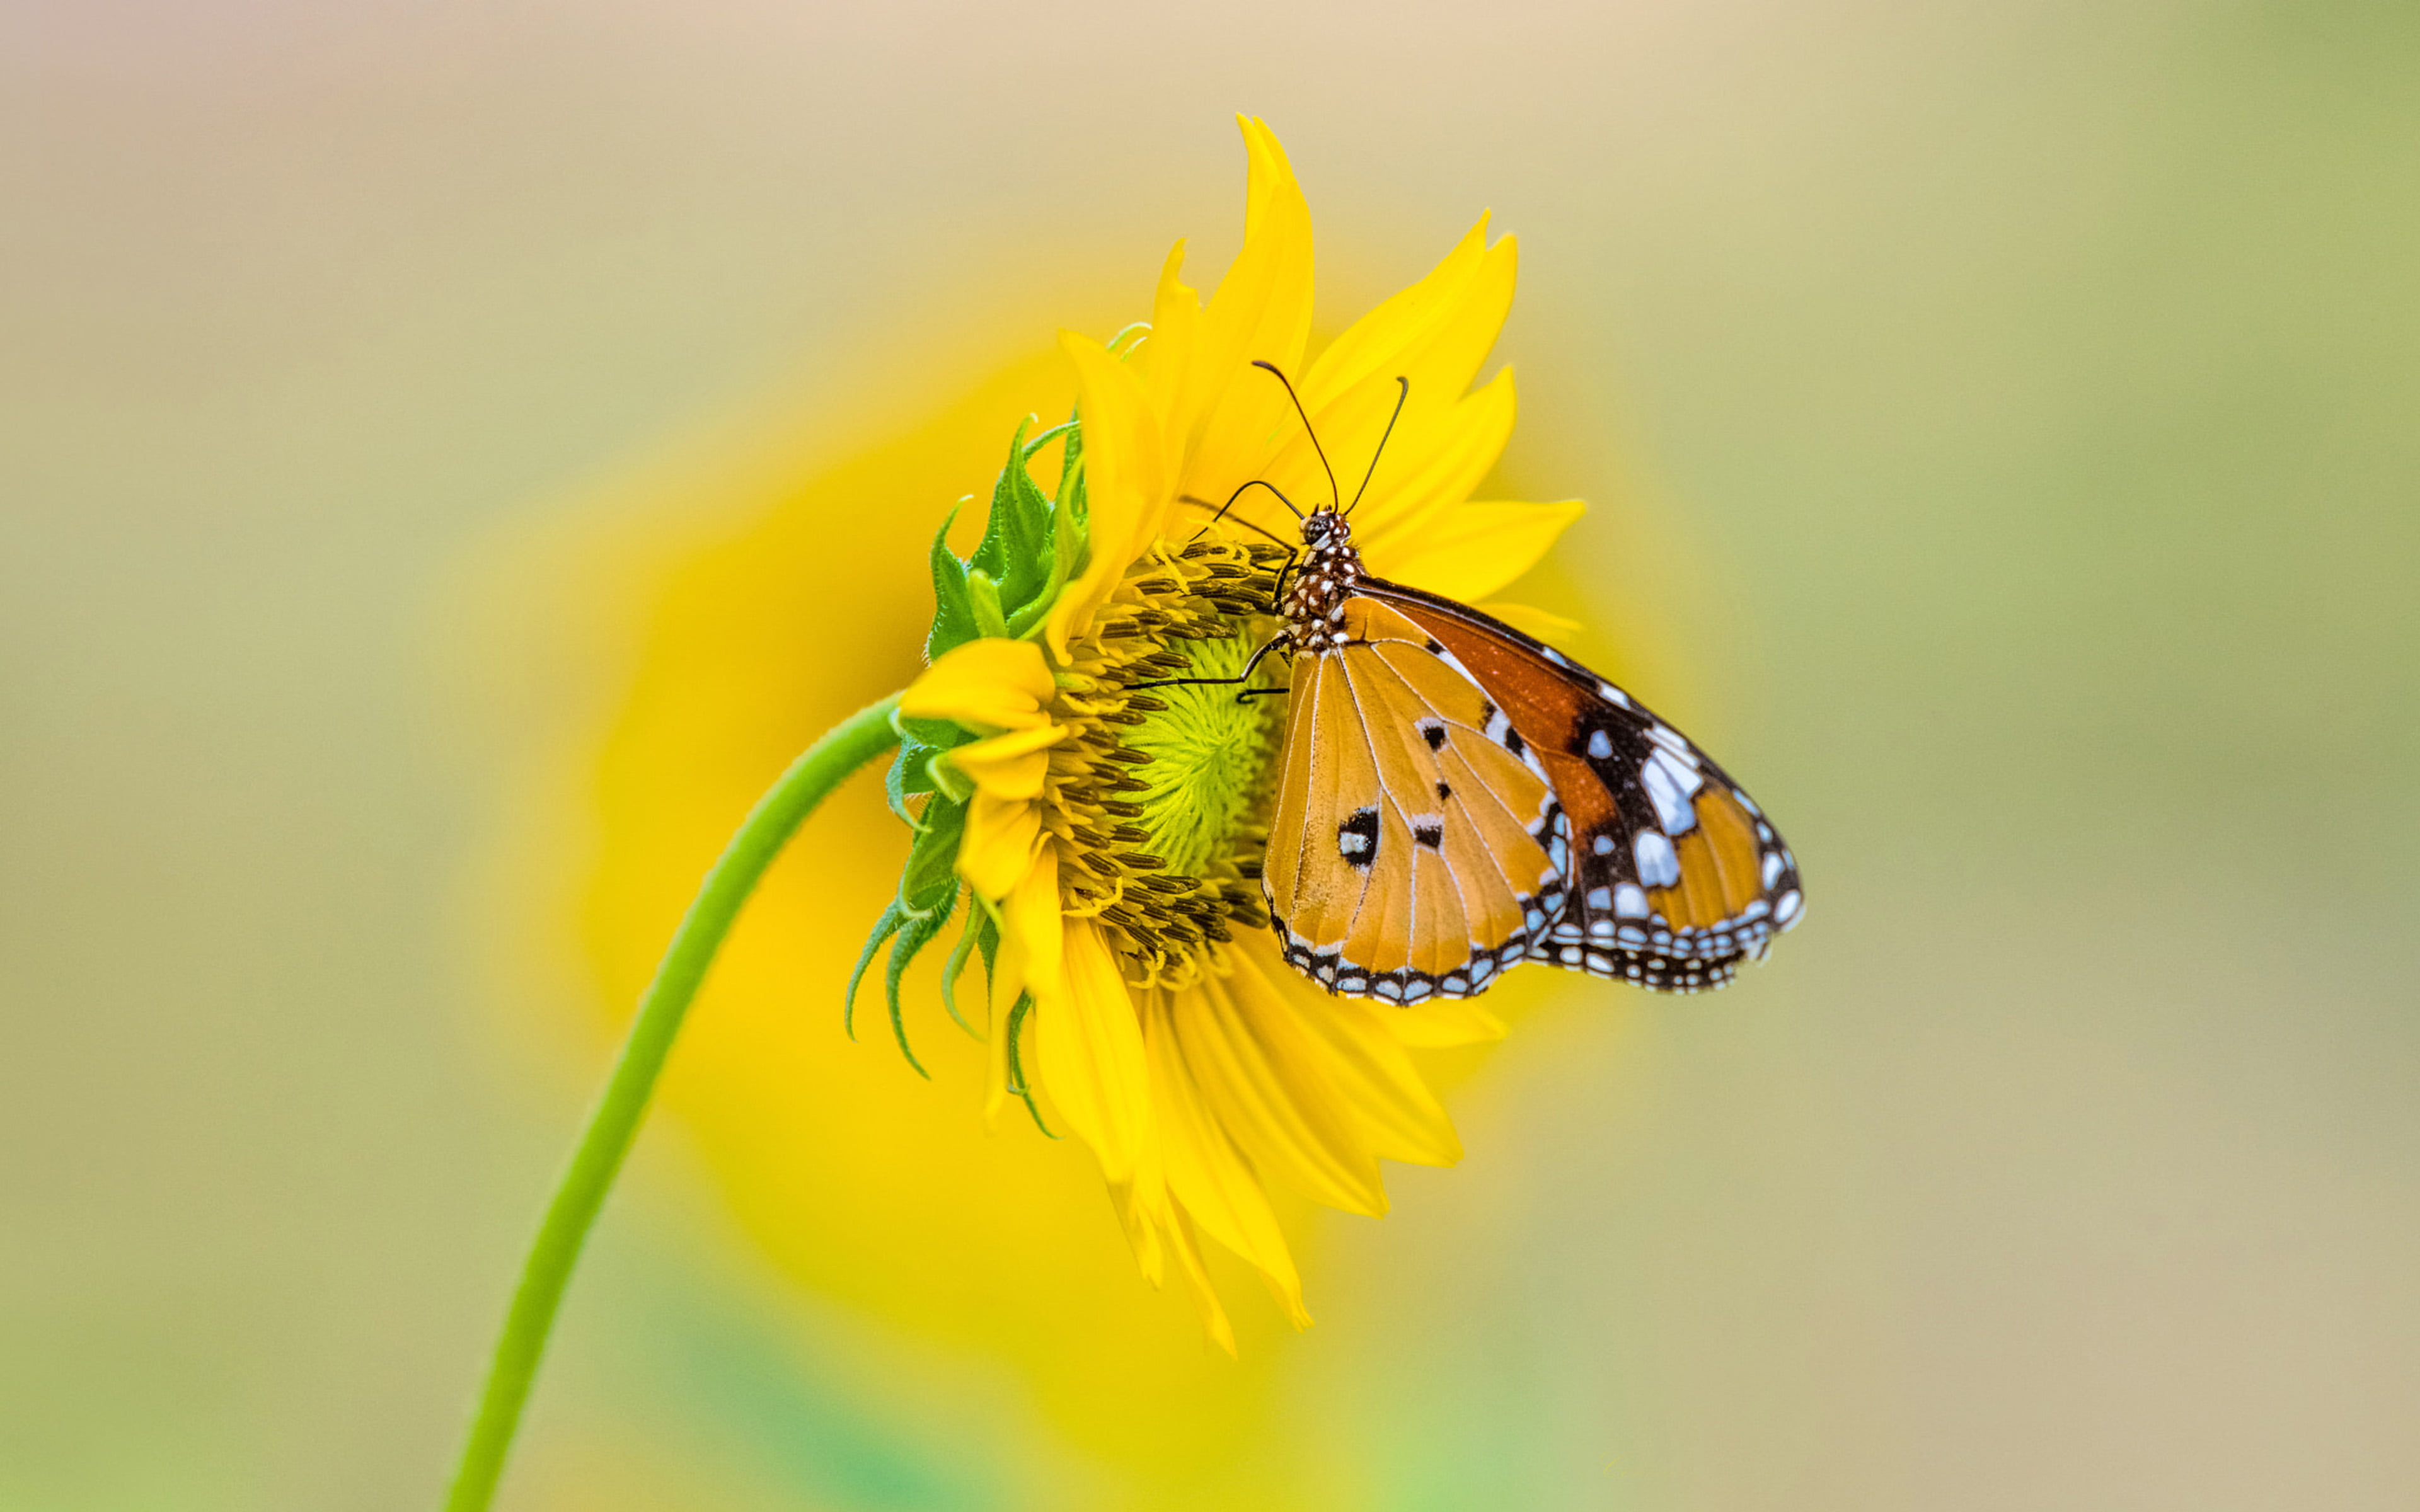 Insect Tiger Butterfly On Yellow Color From Sunflower 4k Ultra Hd Tv Wallpaper For Desktop Laptop Tablet And Mobile Phones 3840×2400